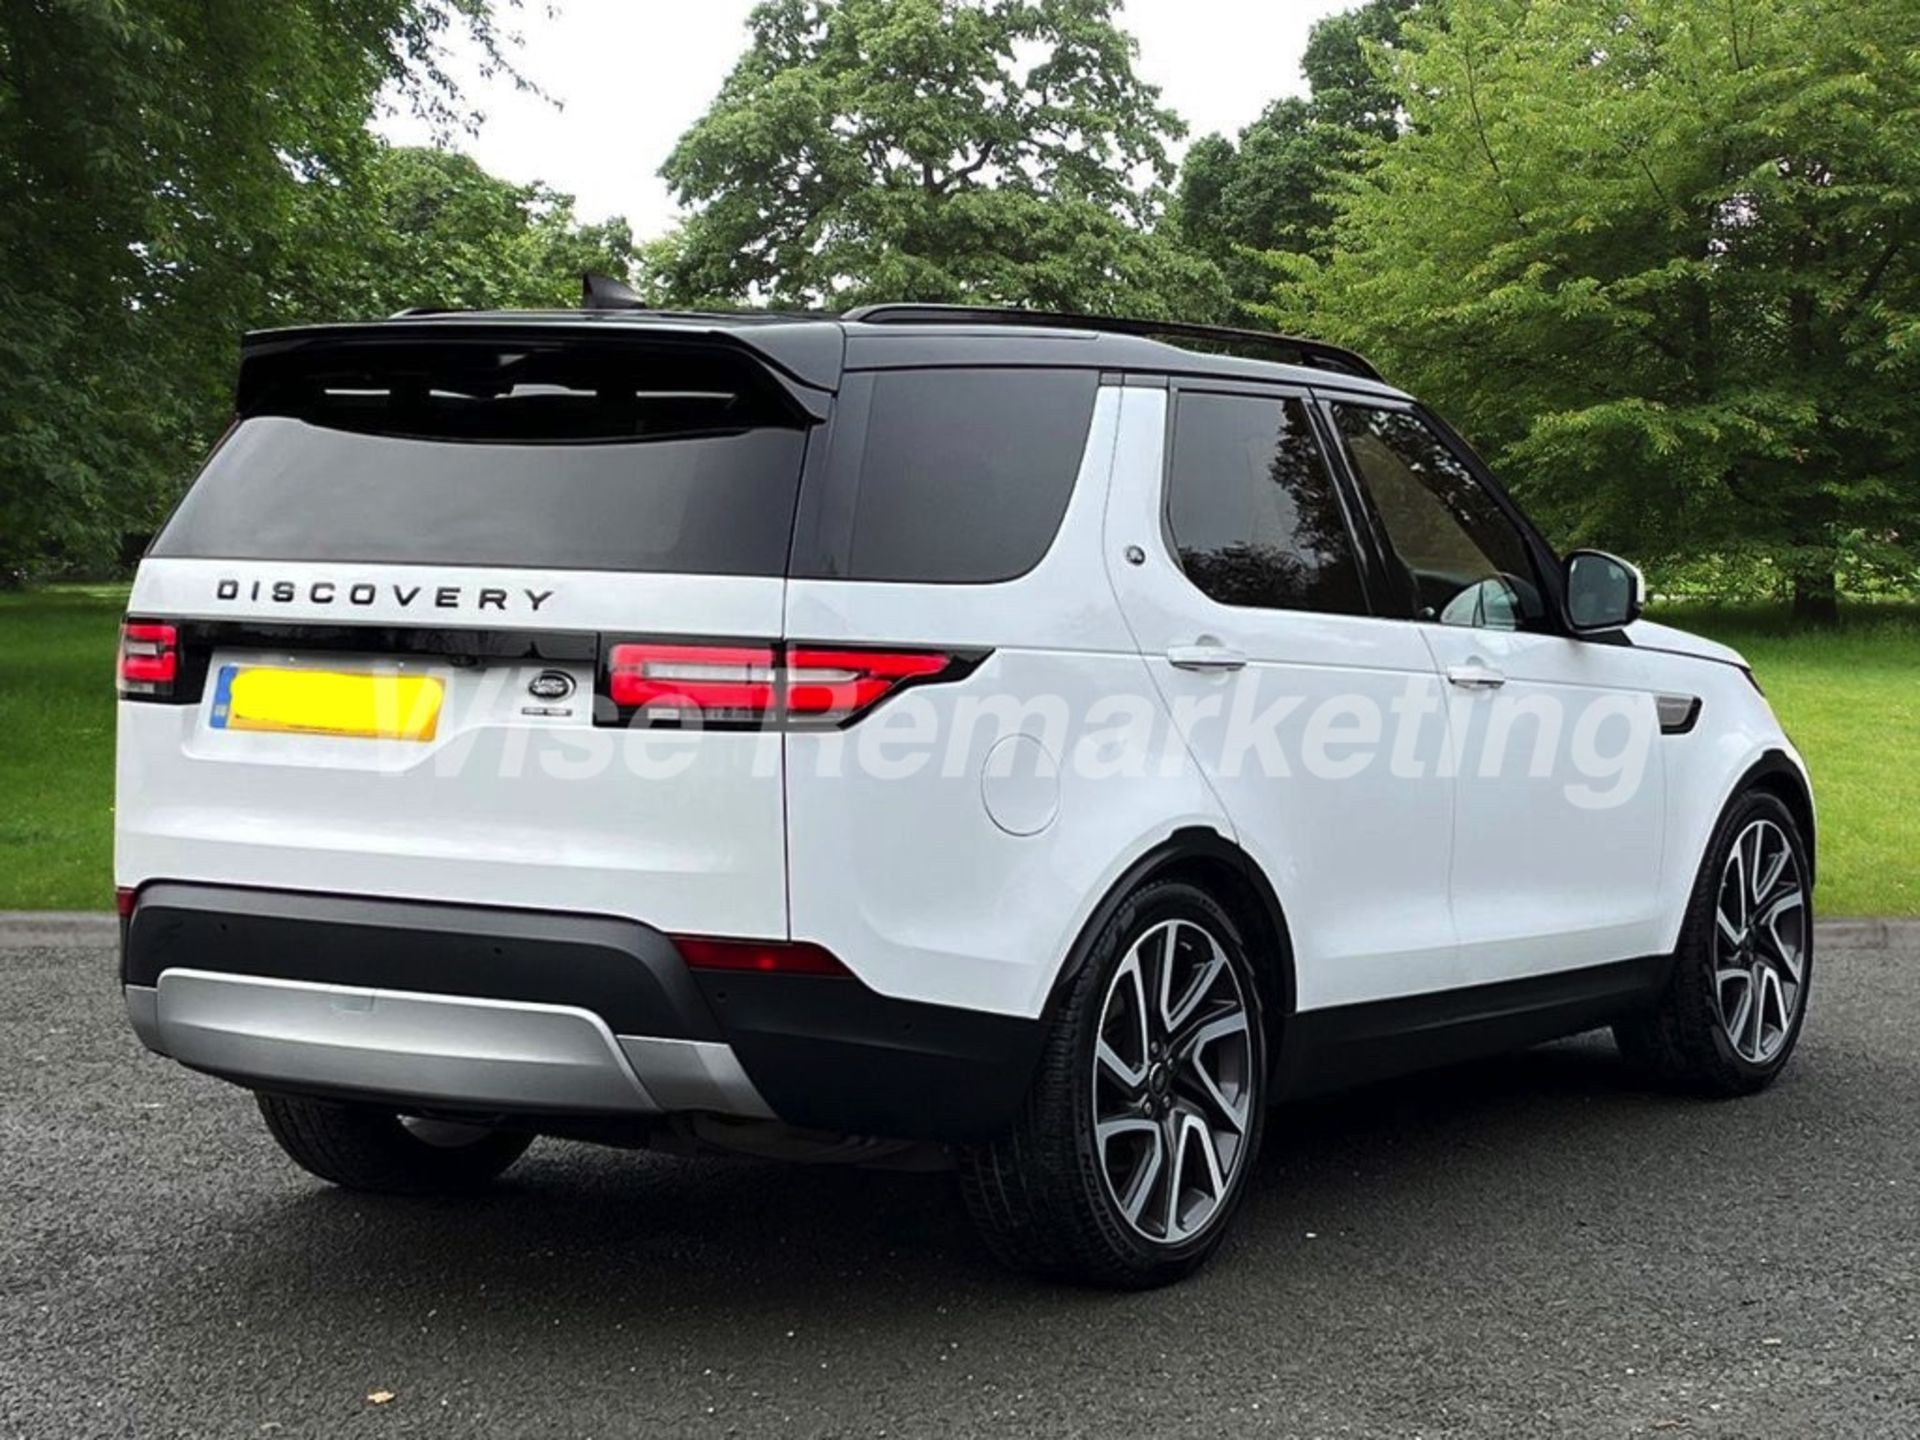 Land Rover Discovery 5 * SUV* (2017 - 67 Reg) *3.0 TD6 - 8 Speed Automatic* (ALL NEW MODEL) - Image 6 of 9